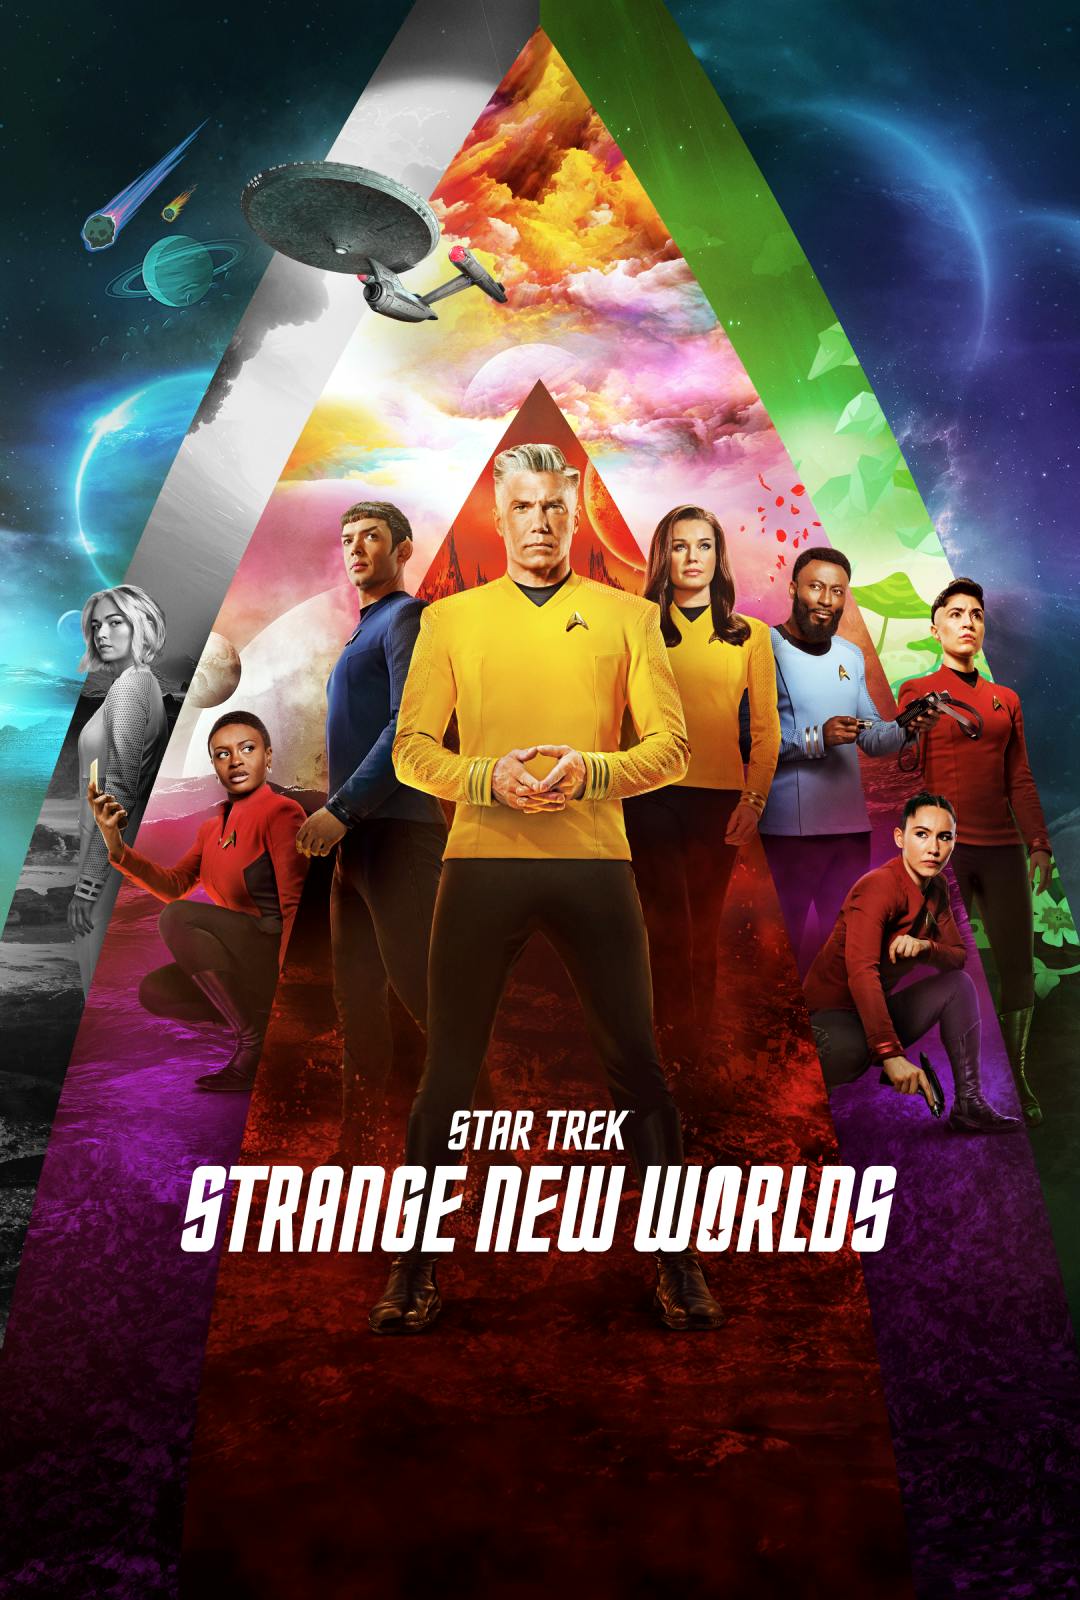 Key art for Star Trek: Strange New Worlds Season 2 showing Captain Christopher Pike, the crew and the U.S.S. Enterprise arranged in a multi-color triangular shape